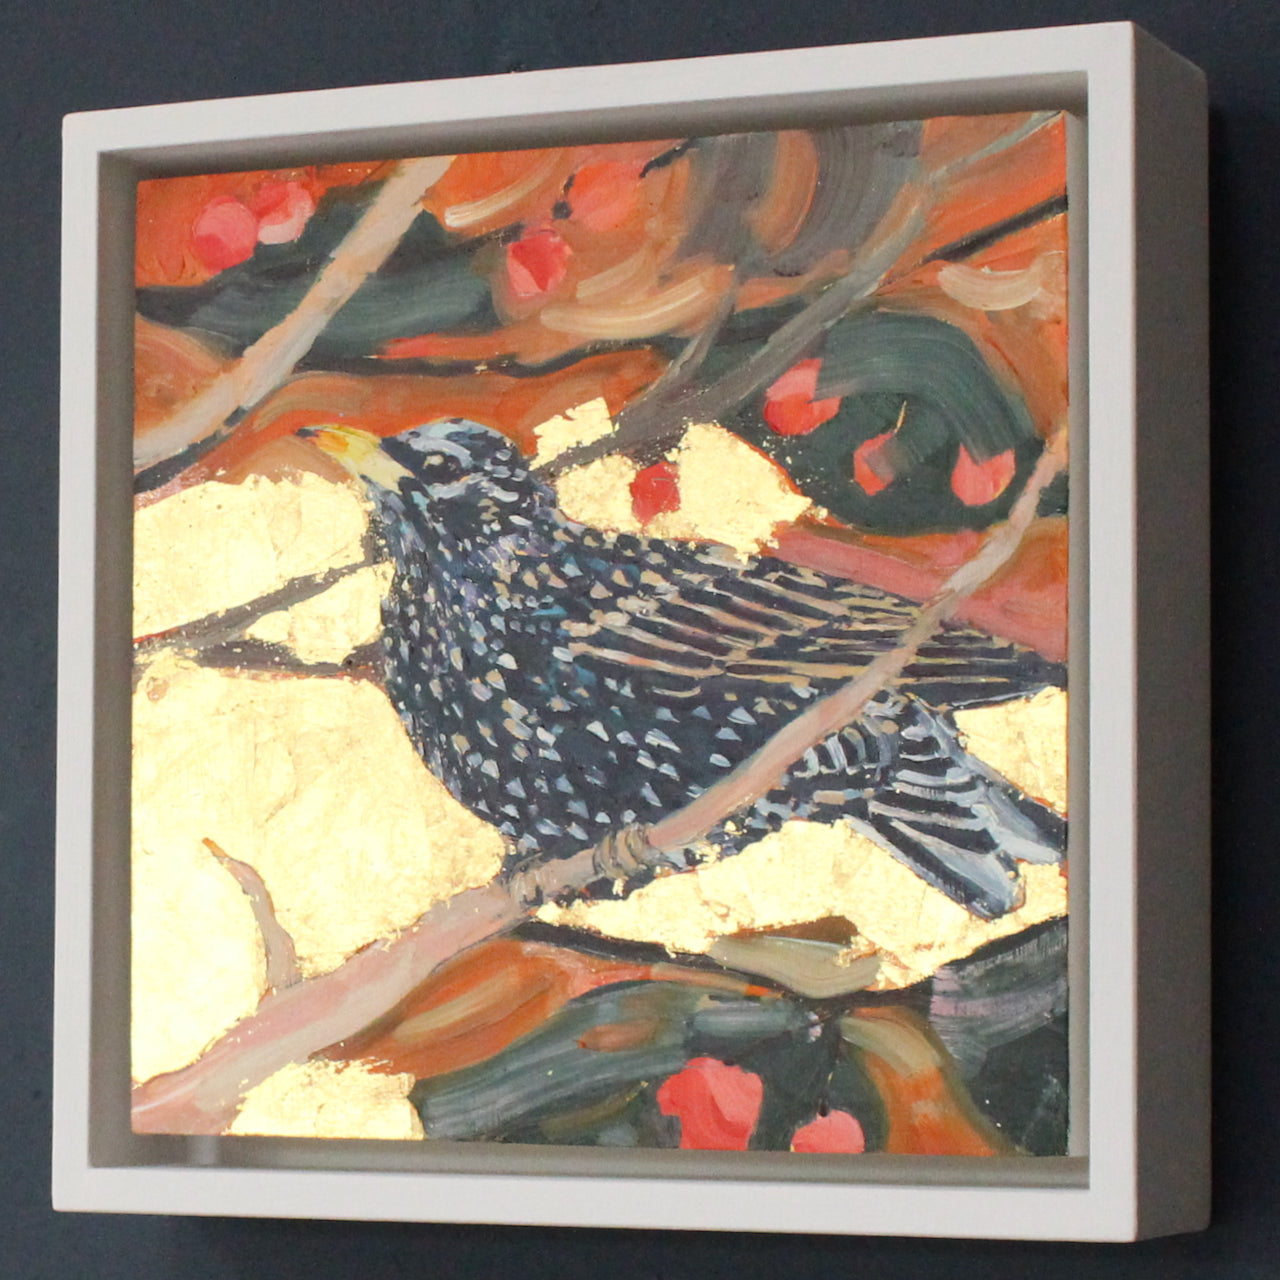 a framed Jill Hudson painting of a starling on a branch with and orange and gold background